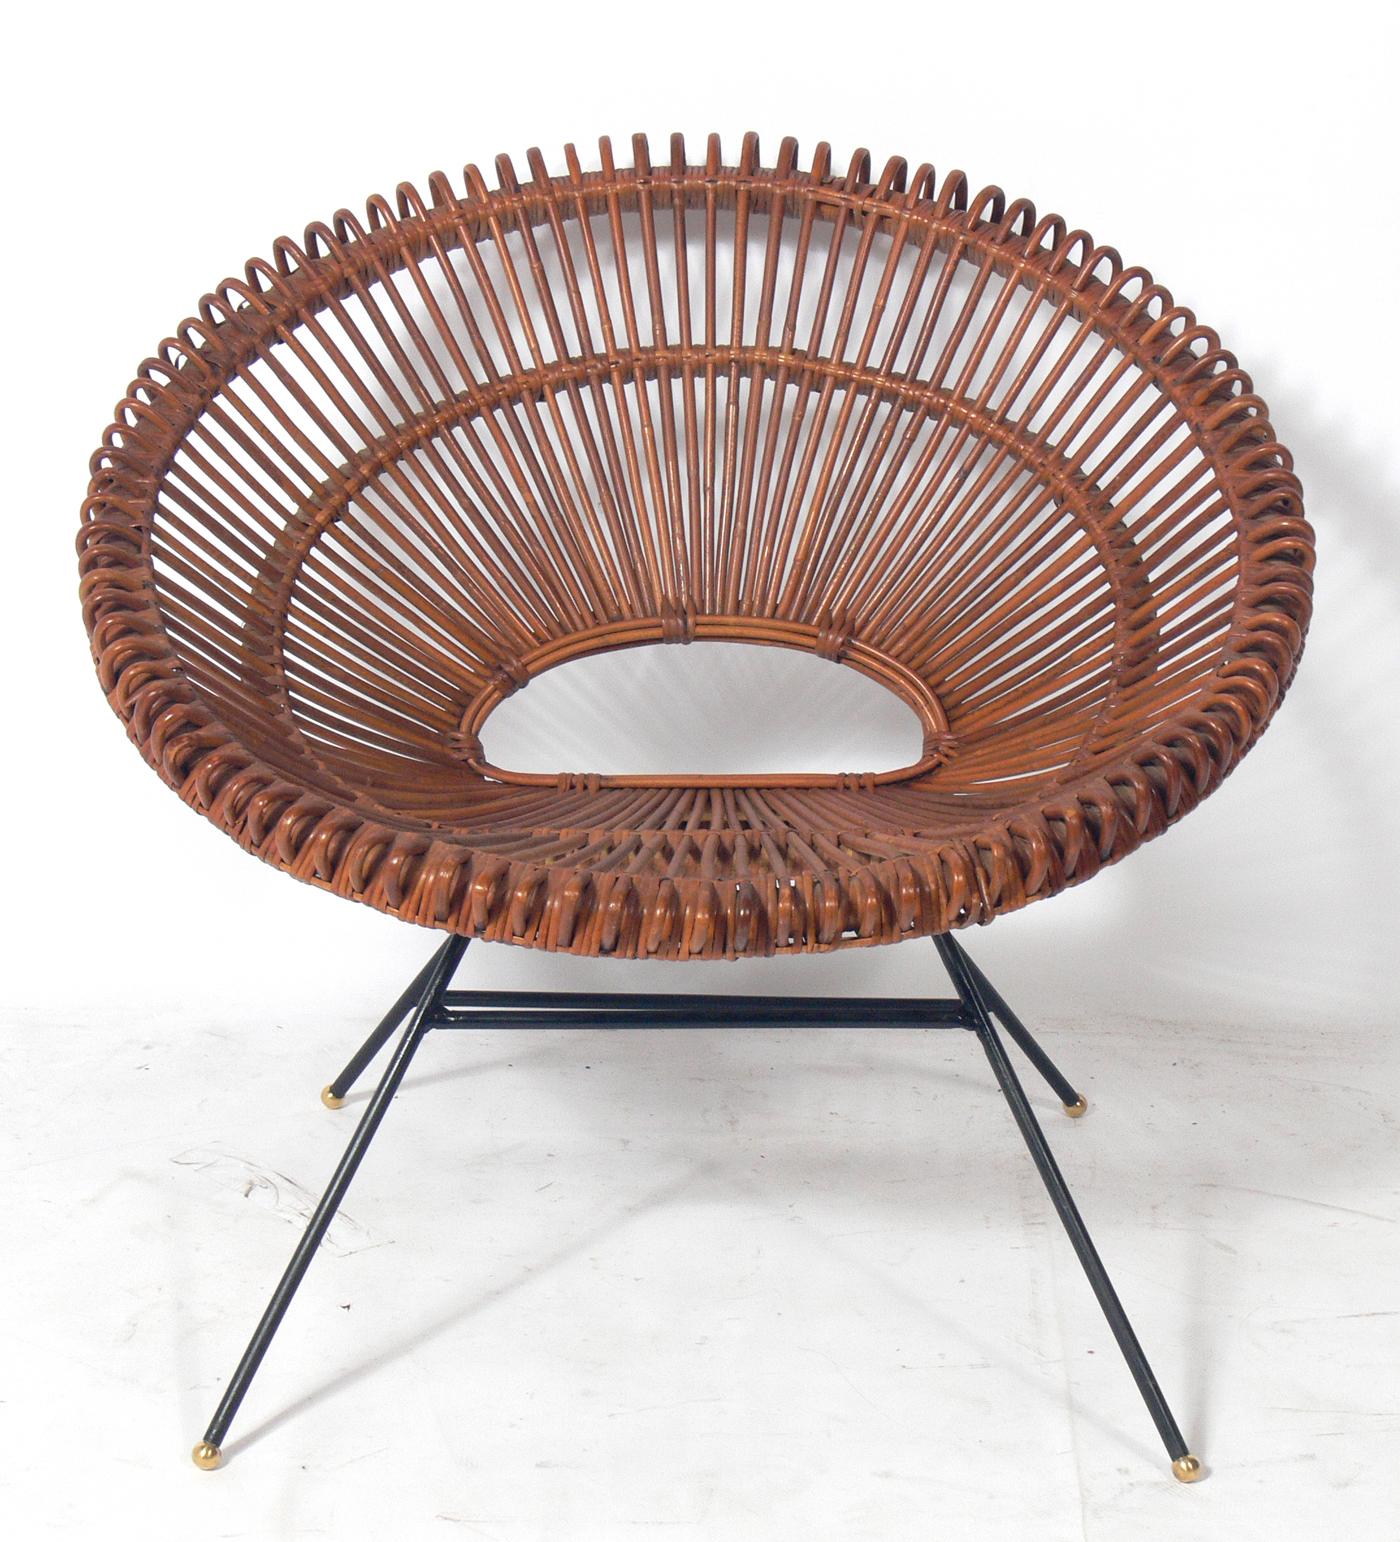 Sculptural French rattan and iron chairs, designed by Dirk Jan Rol and Janine Abraham, France, circa 1950s. These chairs are a near pair, as they have some variations, mainly to the iron bases and slight variations to the size (the one on the left